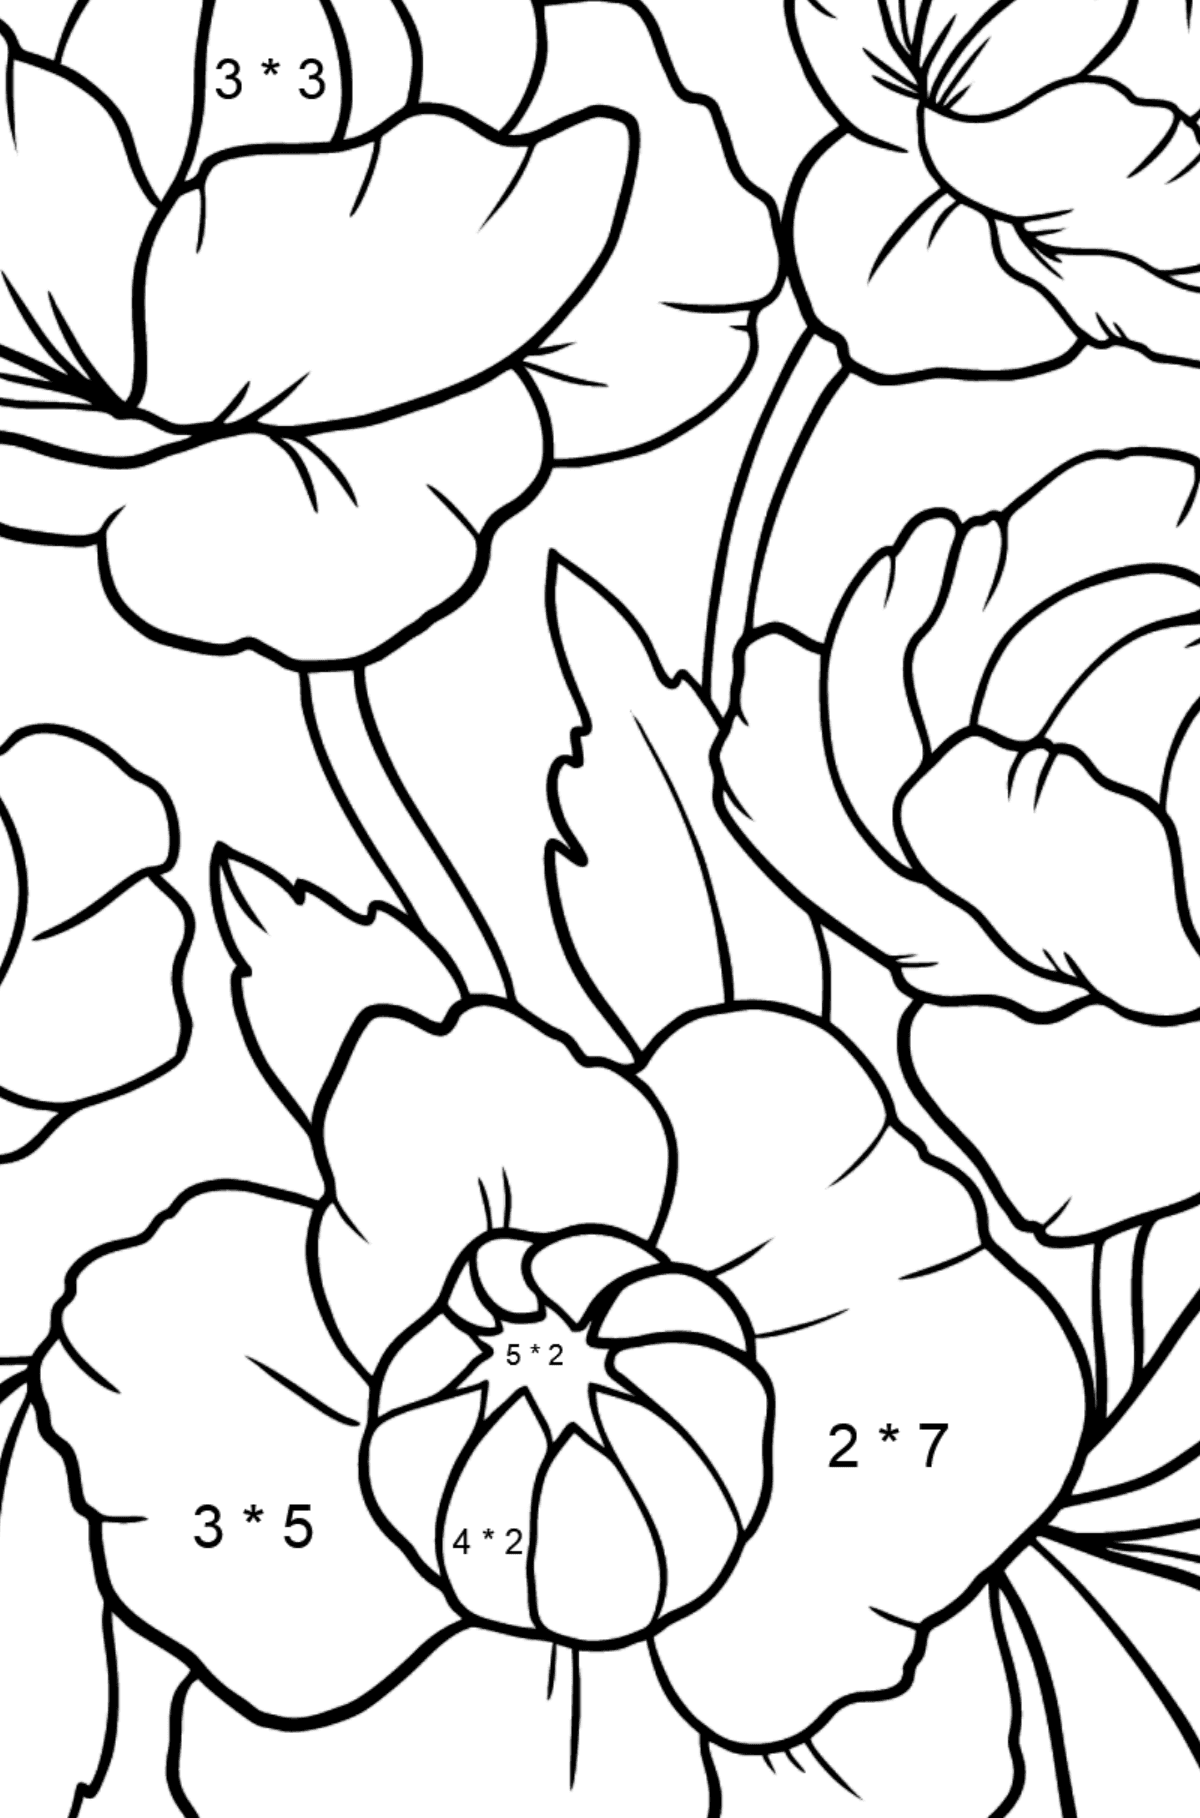 Beautiful Flower Coloring Page - A Red and Pink Globeflower - Math Coloring - Multiplication for Kids